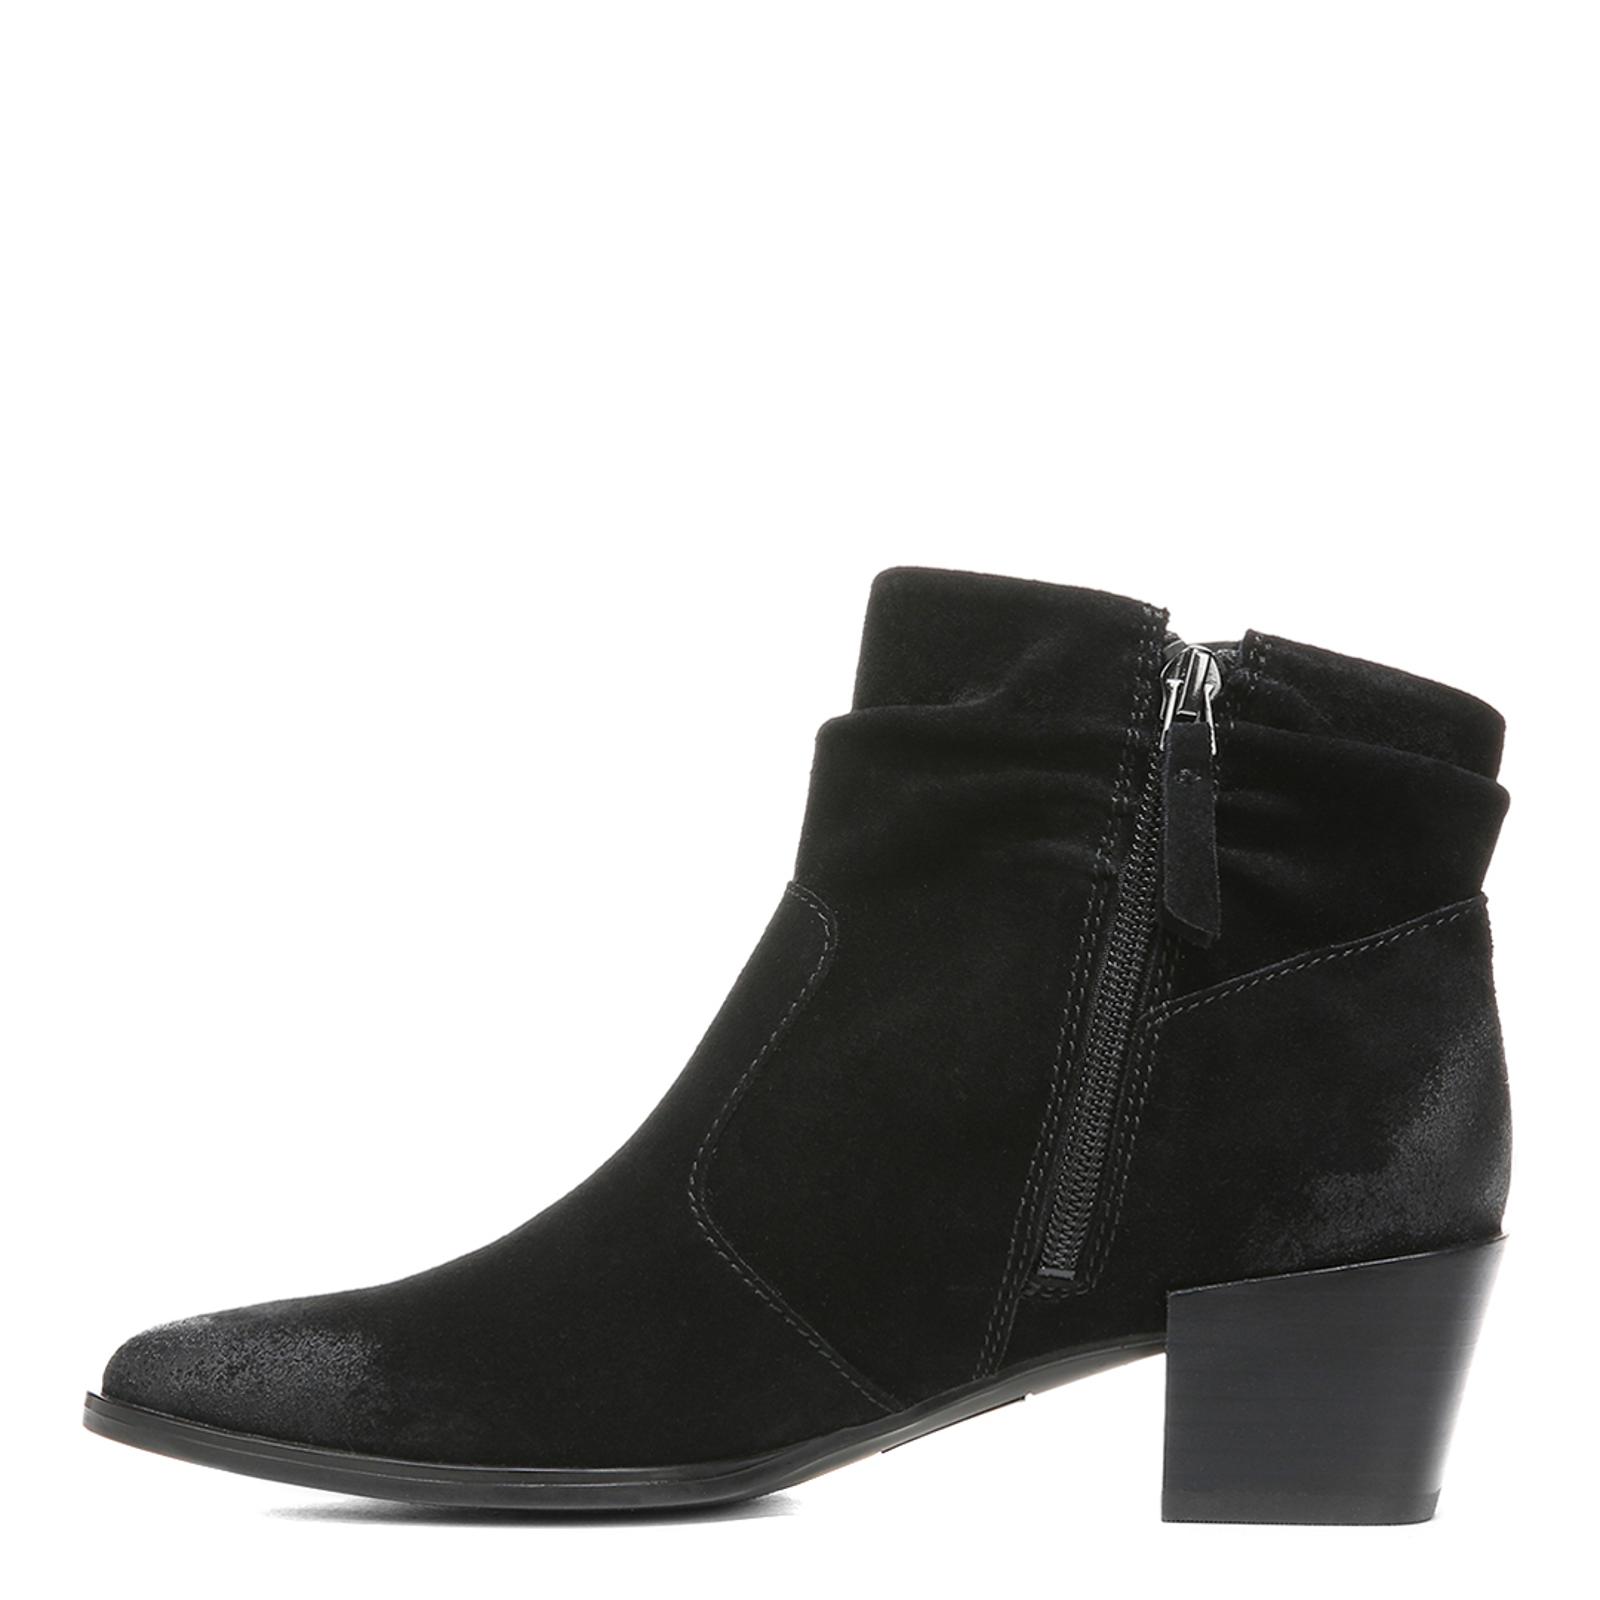 Black Gina Suede Ankle Boot - BrandAlley